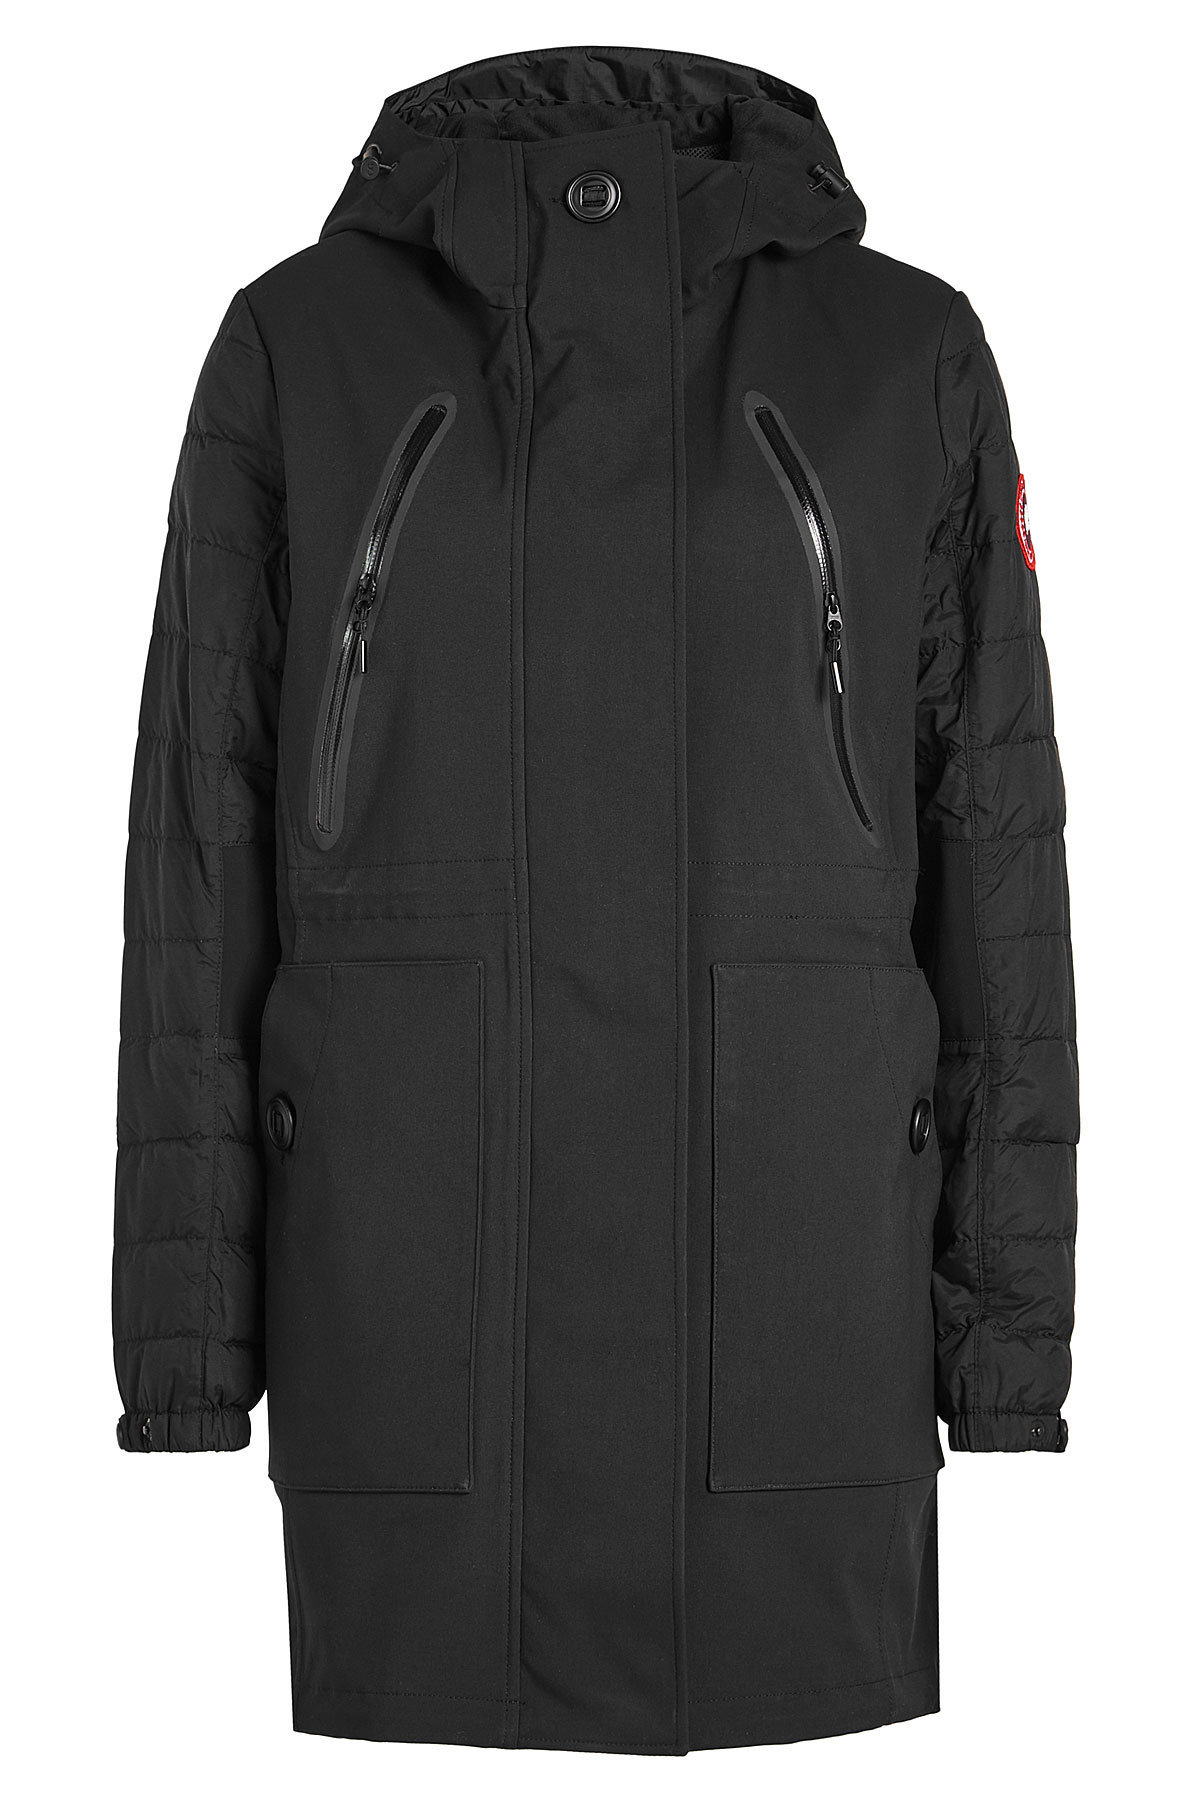 Canada Goose - Sabine Coat with Down Sleeves